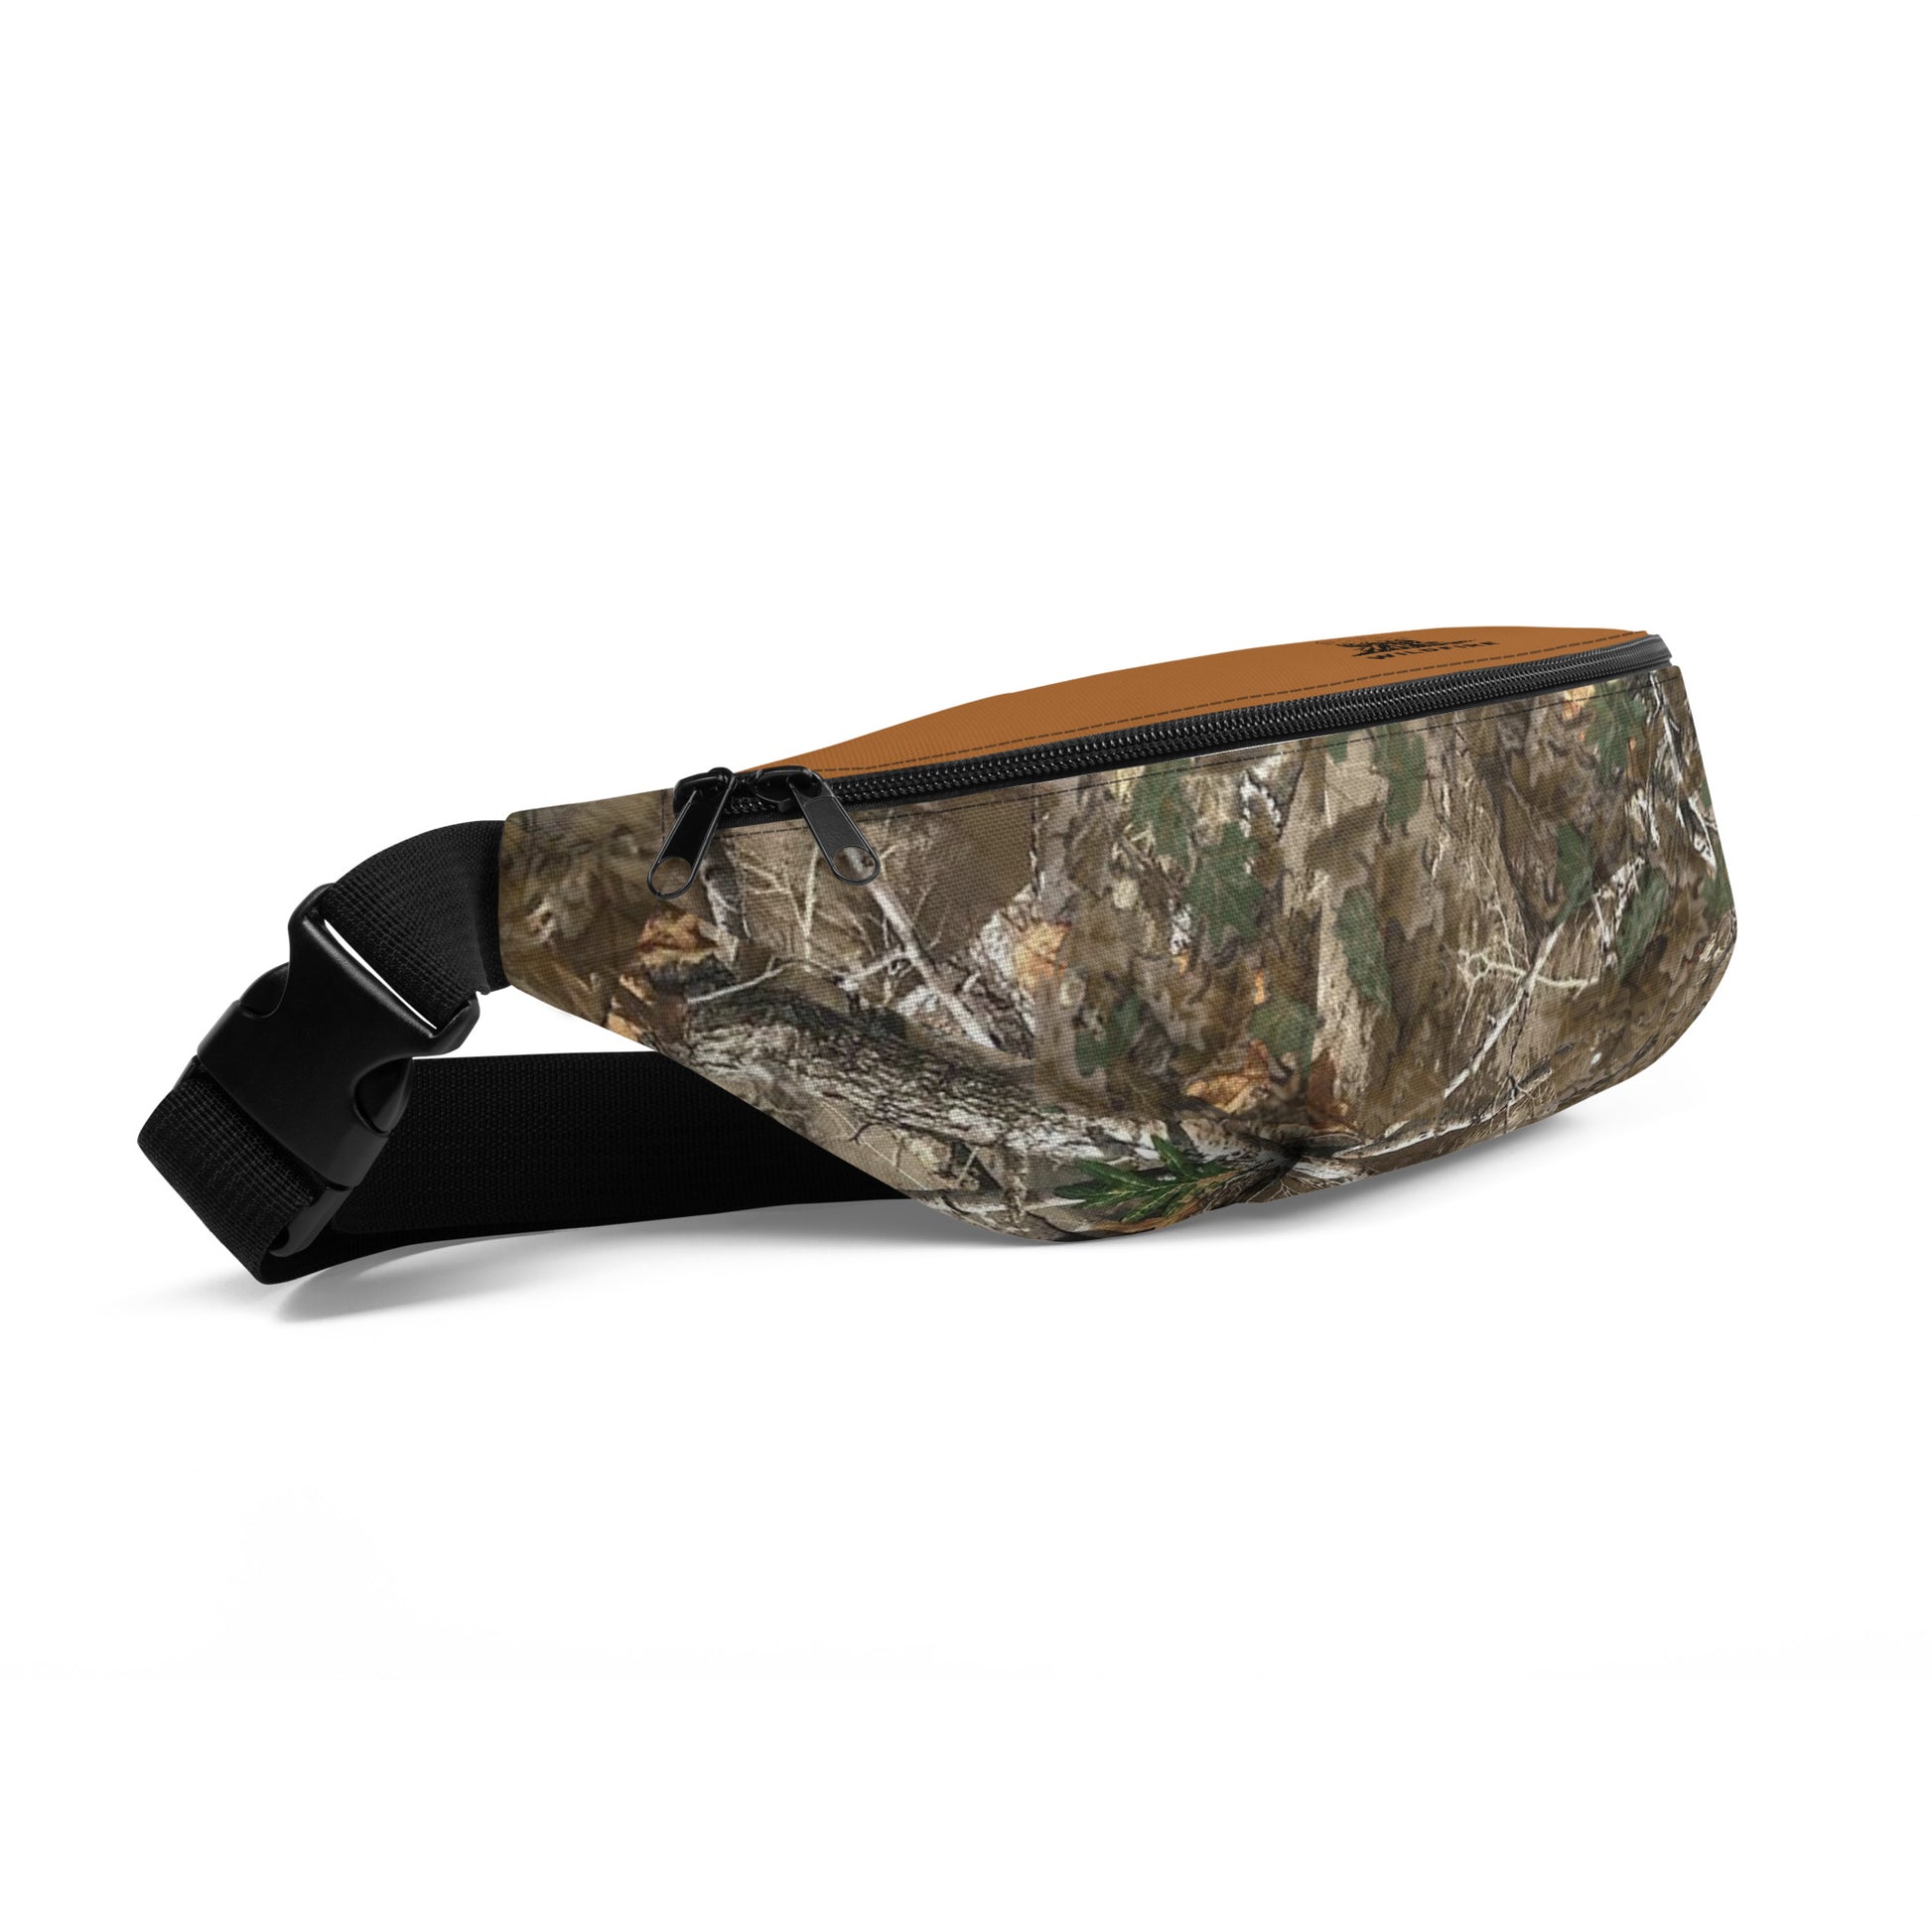 Wildfire Cigars camouflage and brown logo fanny pack facing the front left